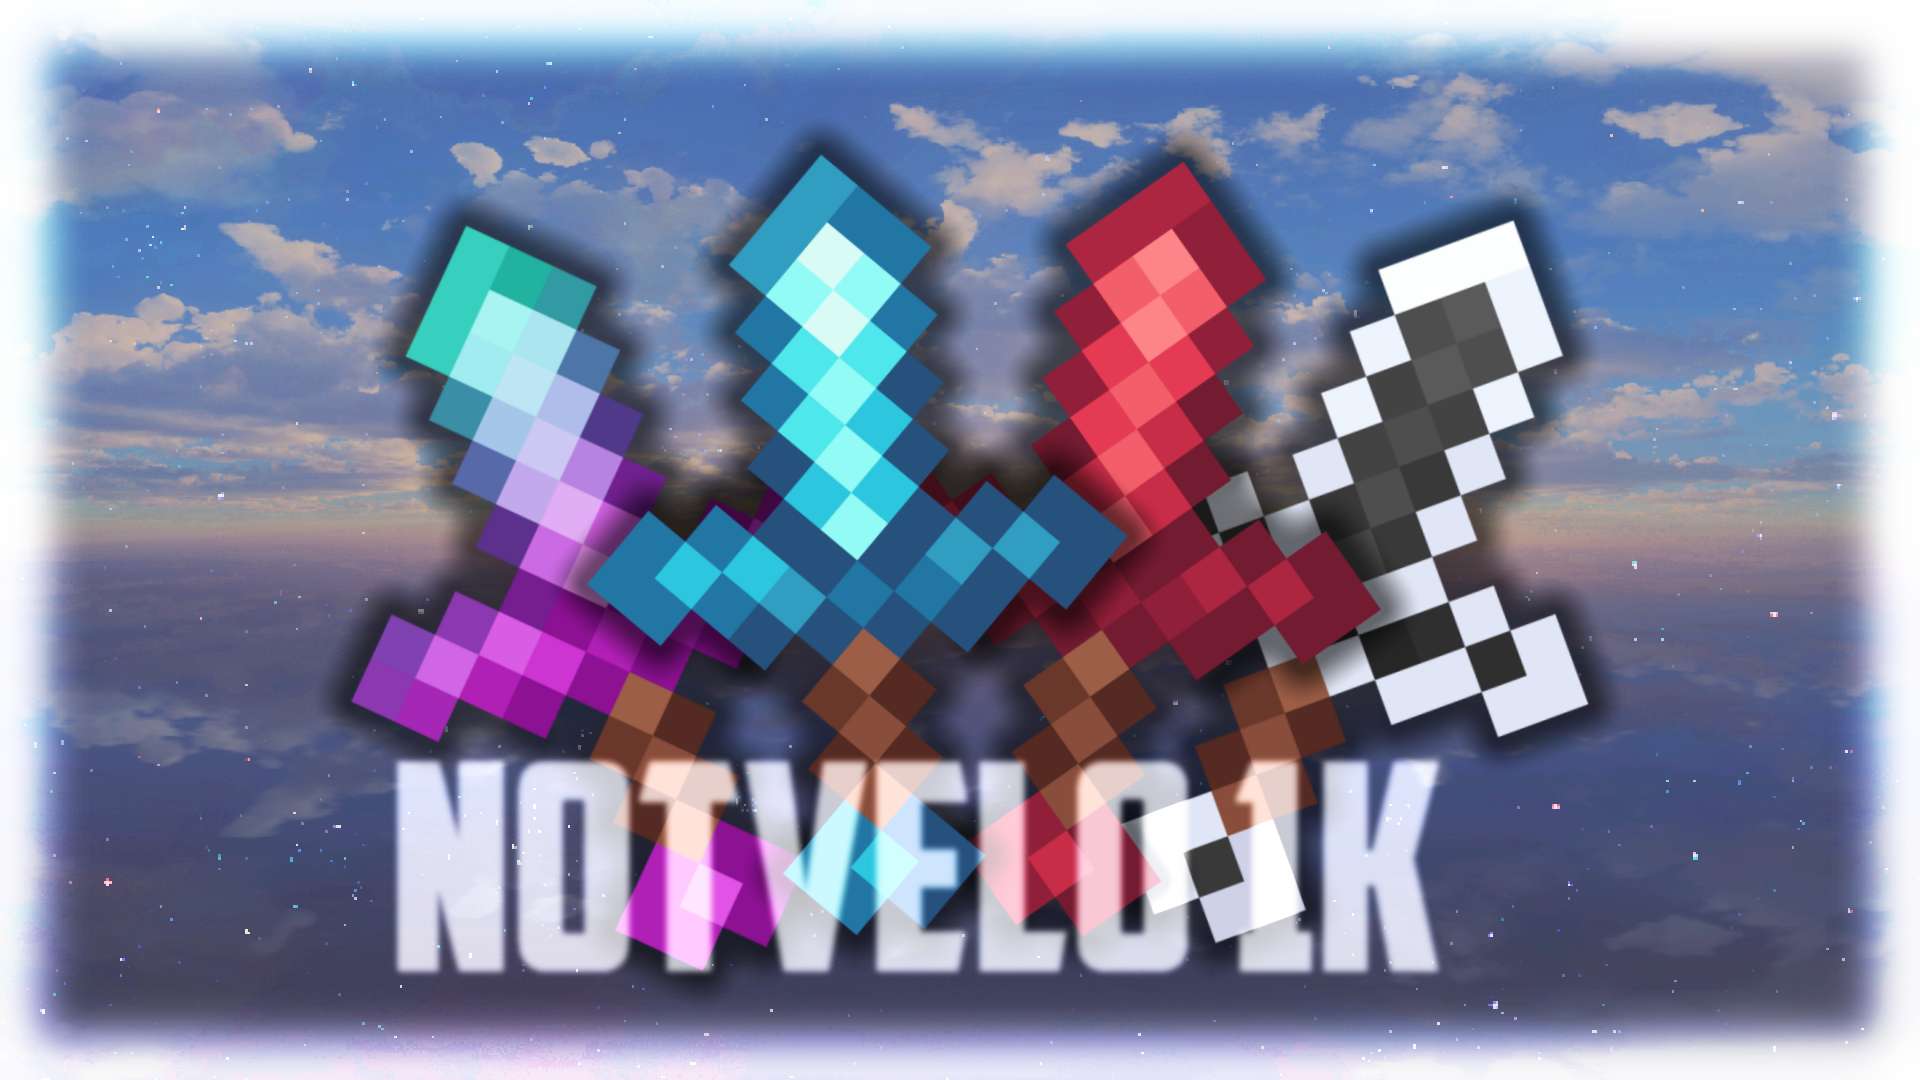 NotVelo 1k - Cotton Candy 16 by Zlax on PvPRP